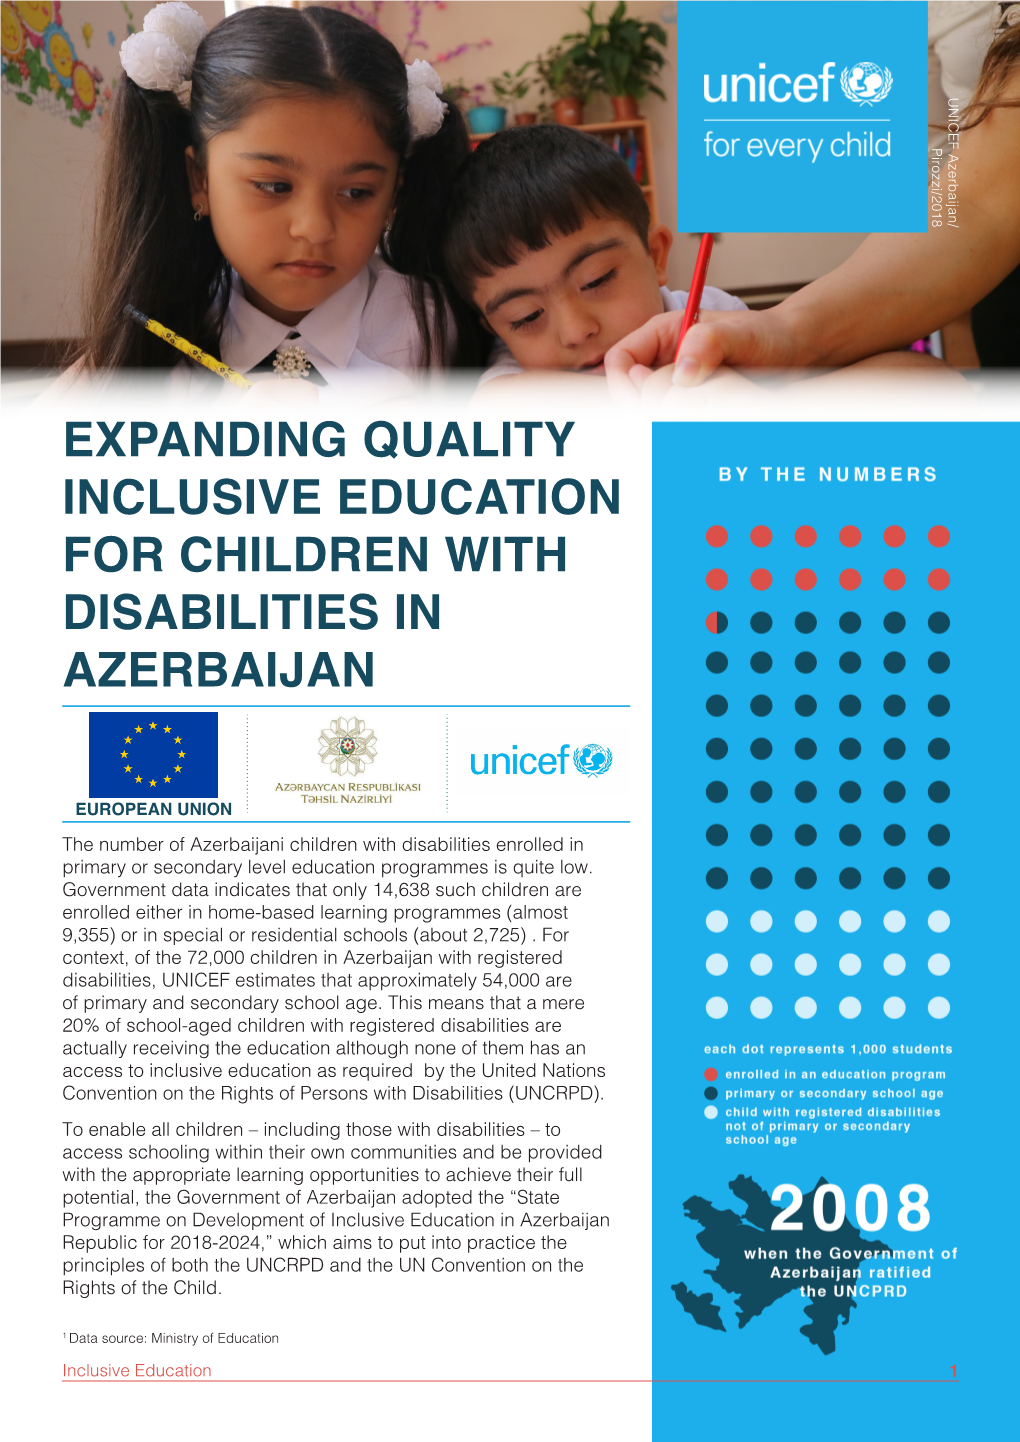 Expanding Quality Inclusive Education for Children with Disabilities in Azerbaijan